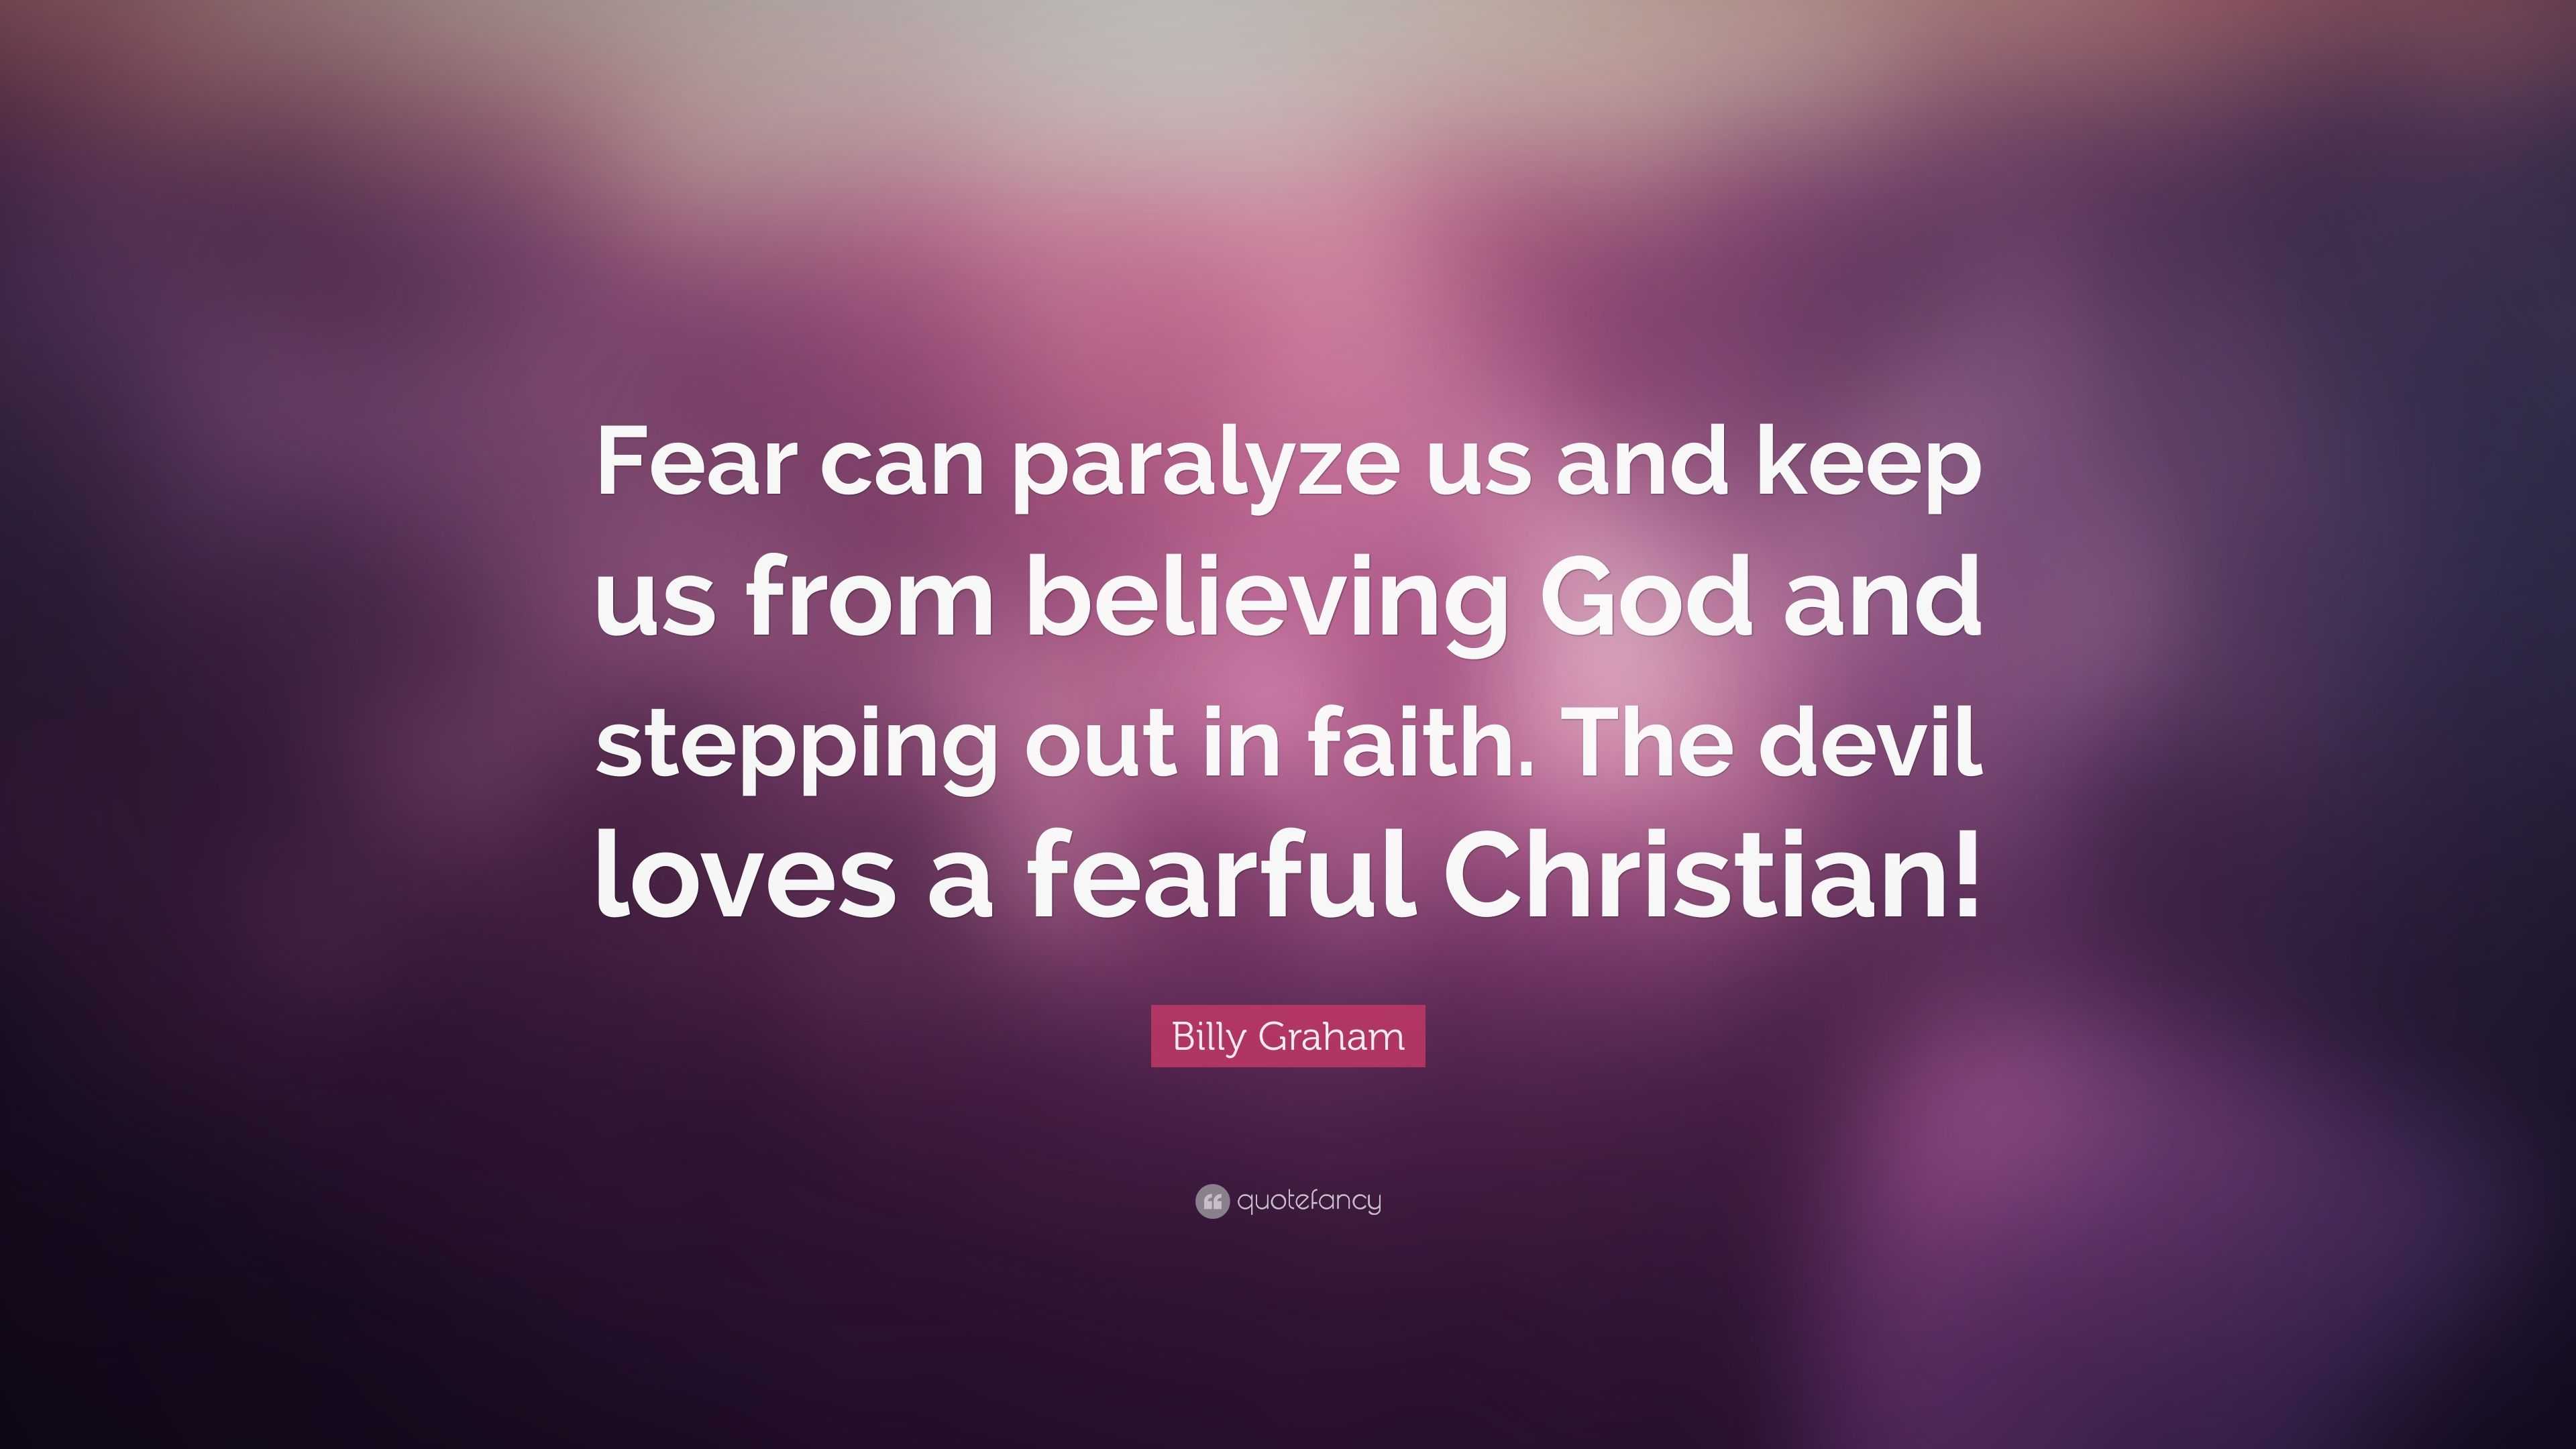 Billy Graham Quote: “Fear can paralyze us and keep us from believing ...